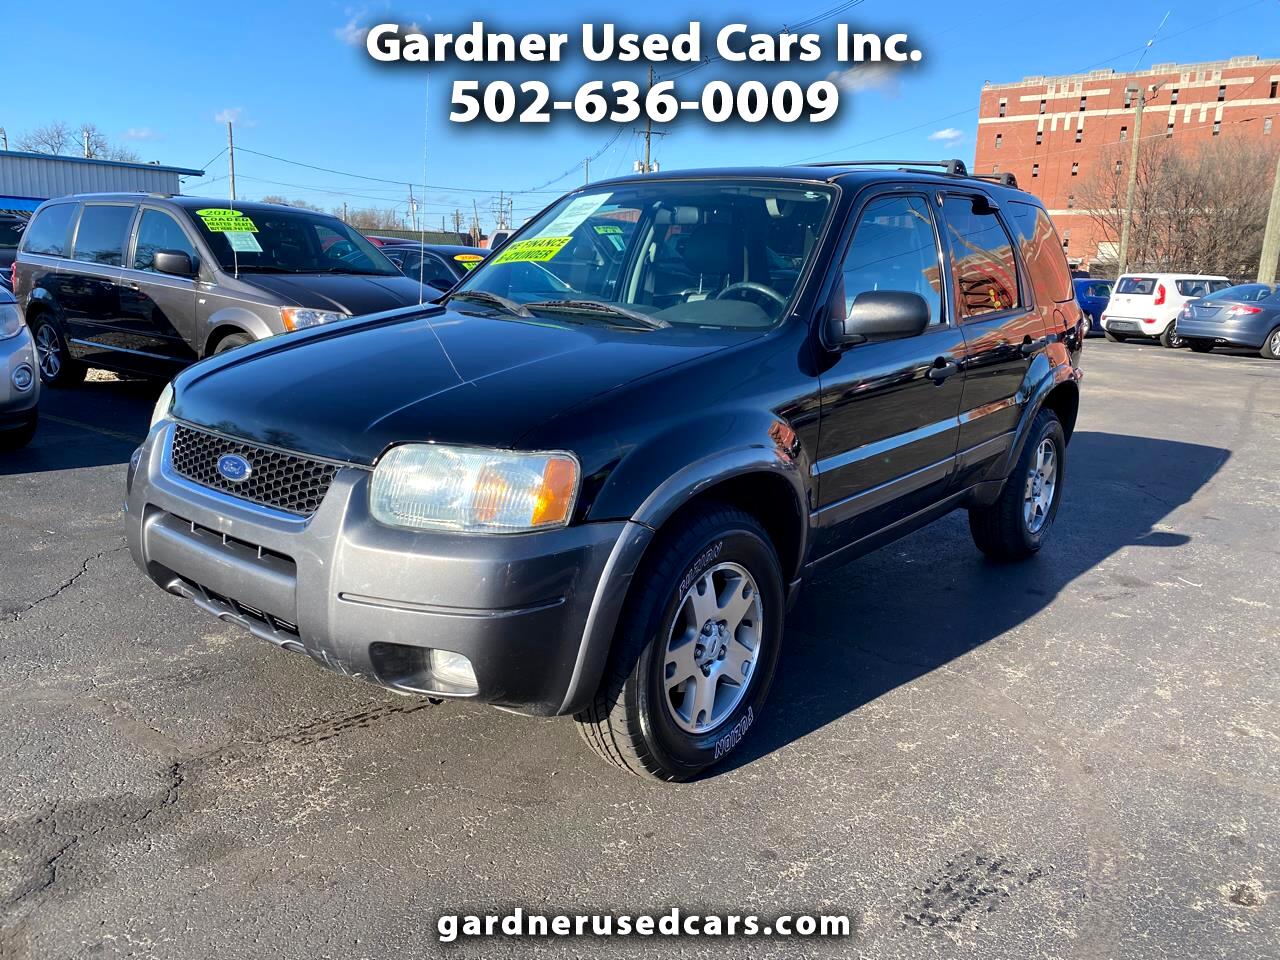 Ford Escape 4dr 103" WB XLT 4WD Sport 2003